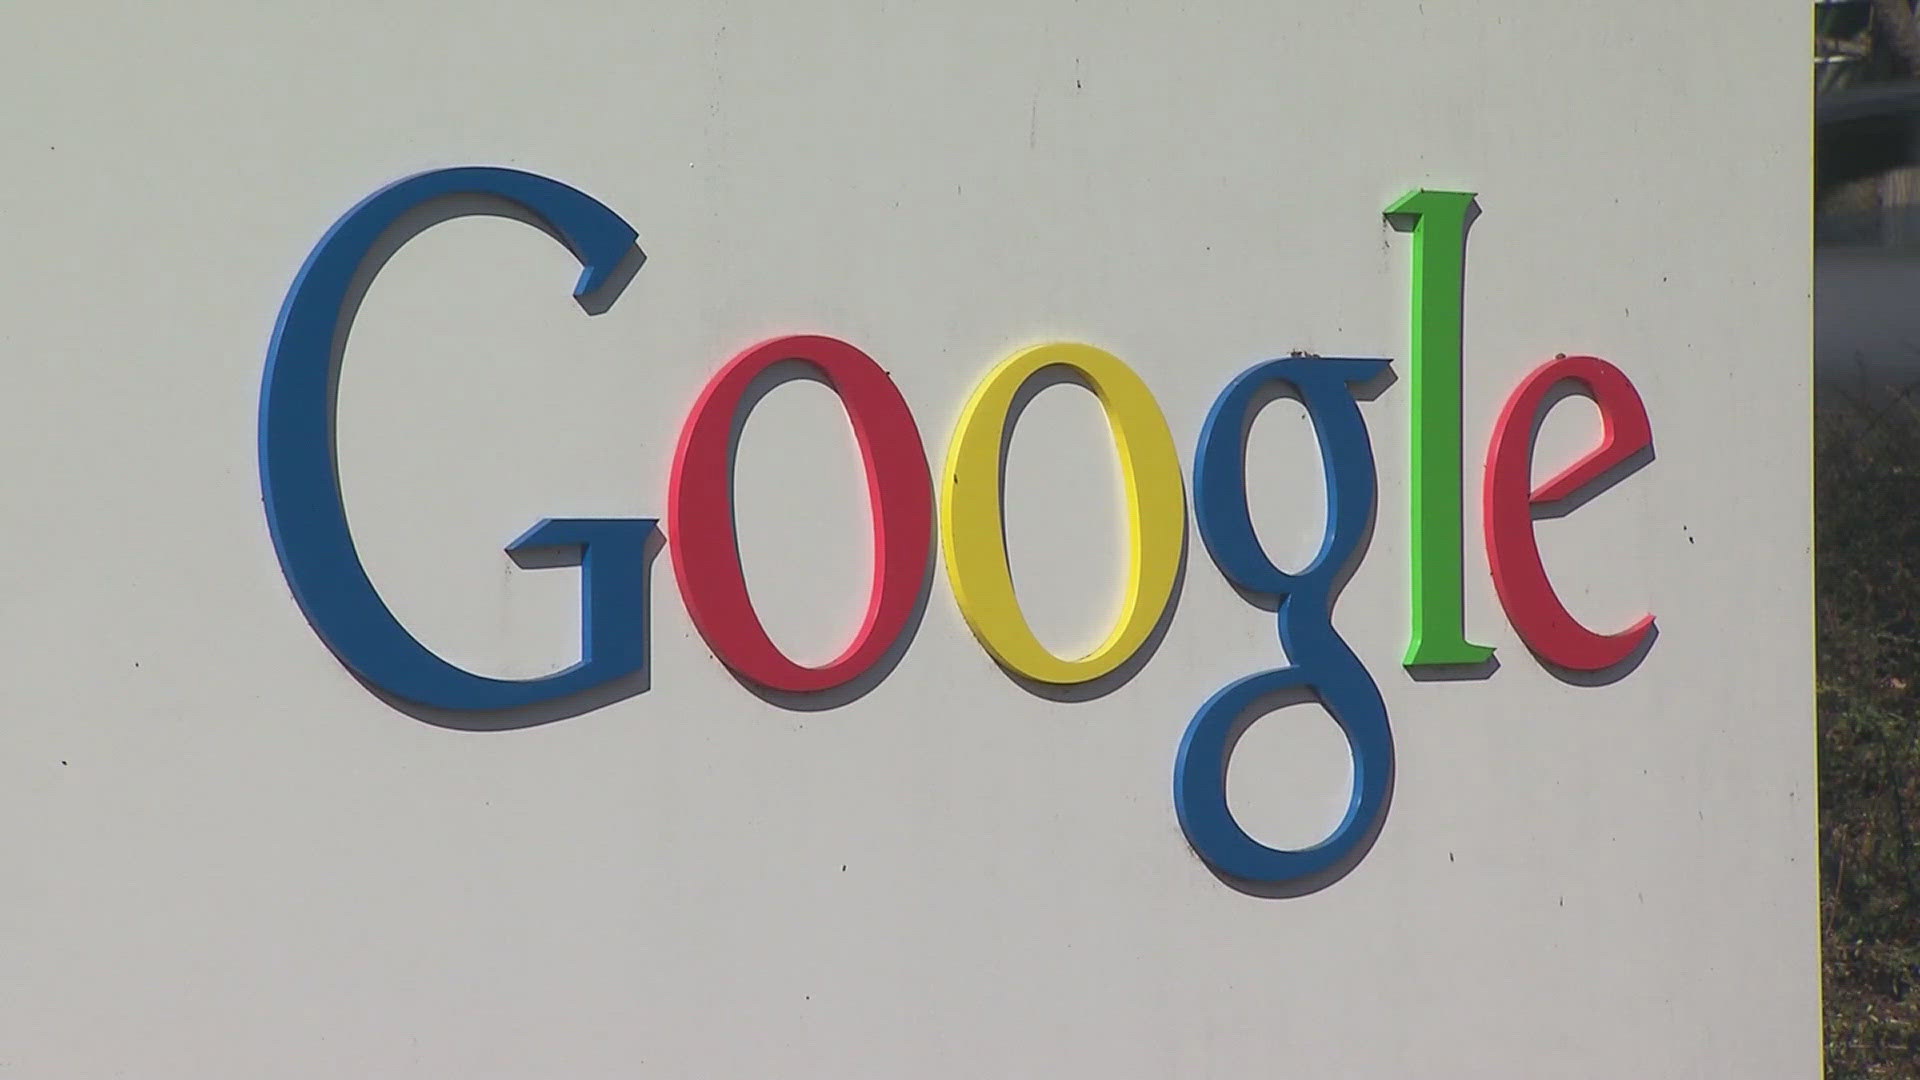 Google's Alphabet was among the companies with a positive earnings report released this week.